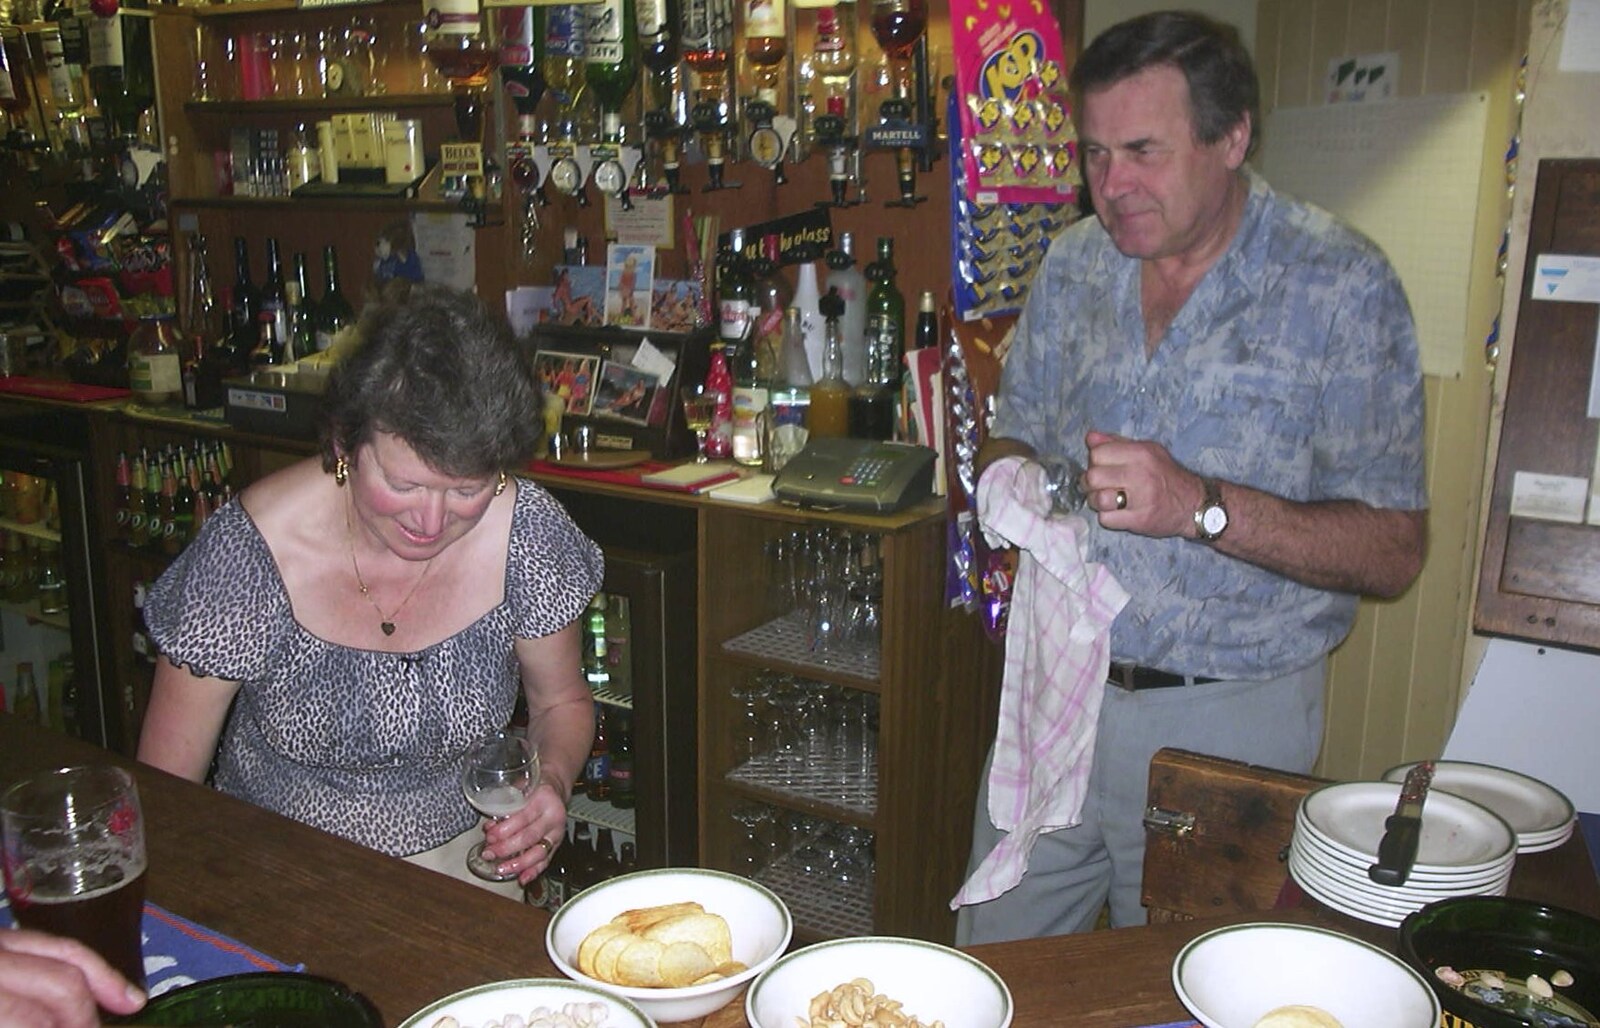 Sylvia and Alan behind the bar from Anne's Birthday Curry and Cake, The Swan Inn, Brome - 24th March 2002